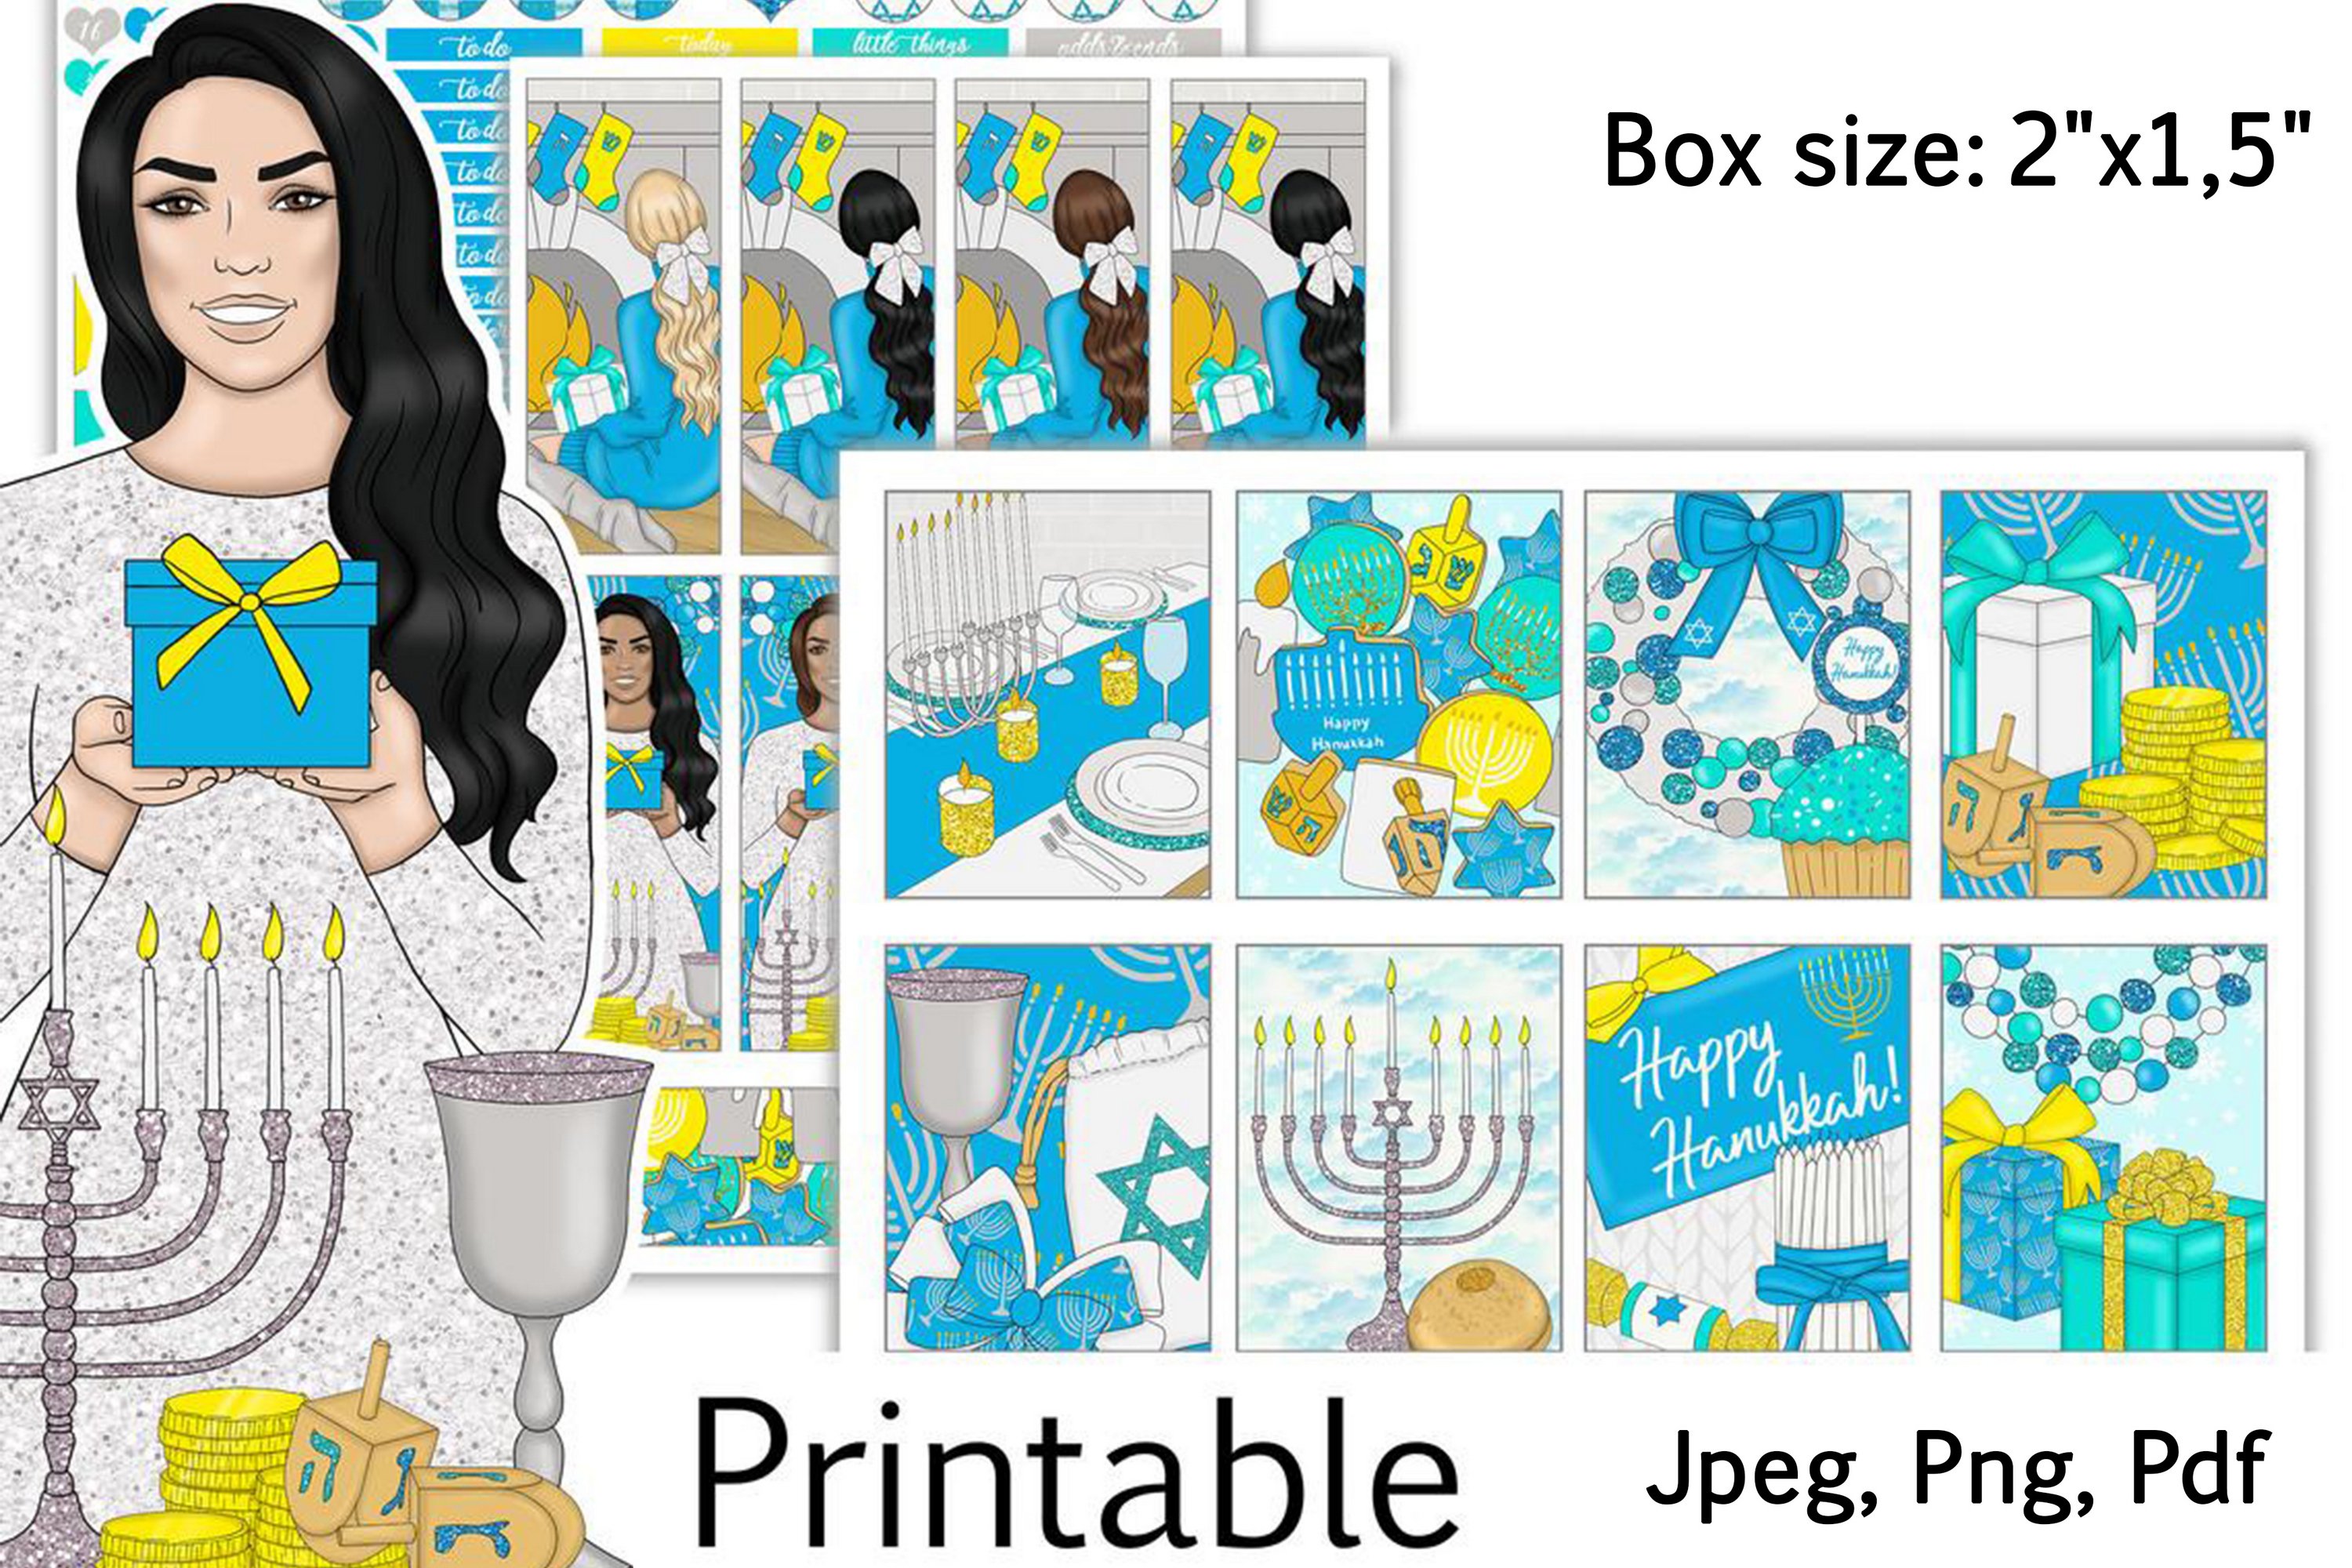 Prints with a girl on the theme of Hanukkah.